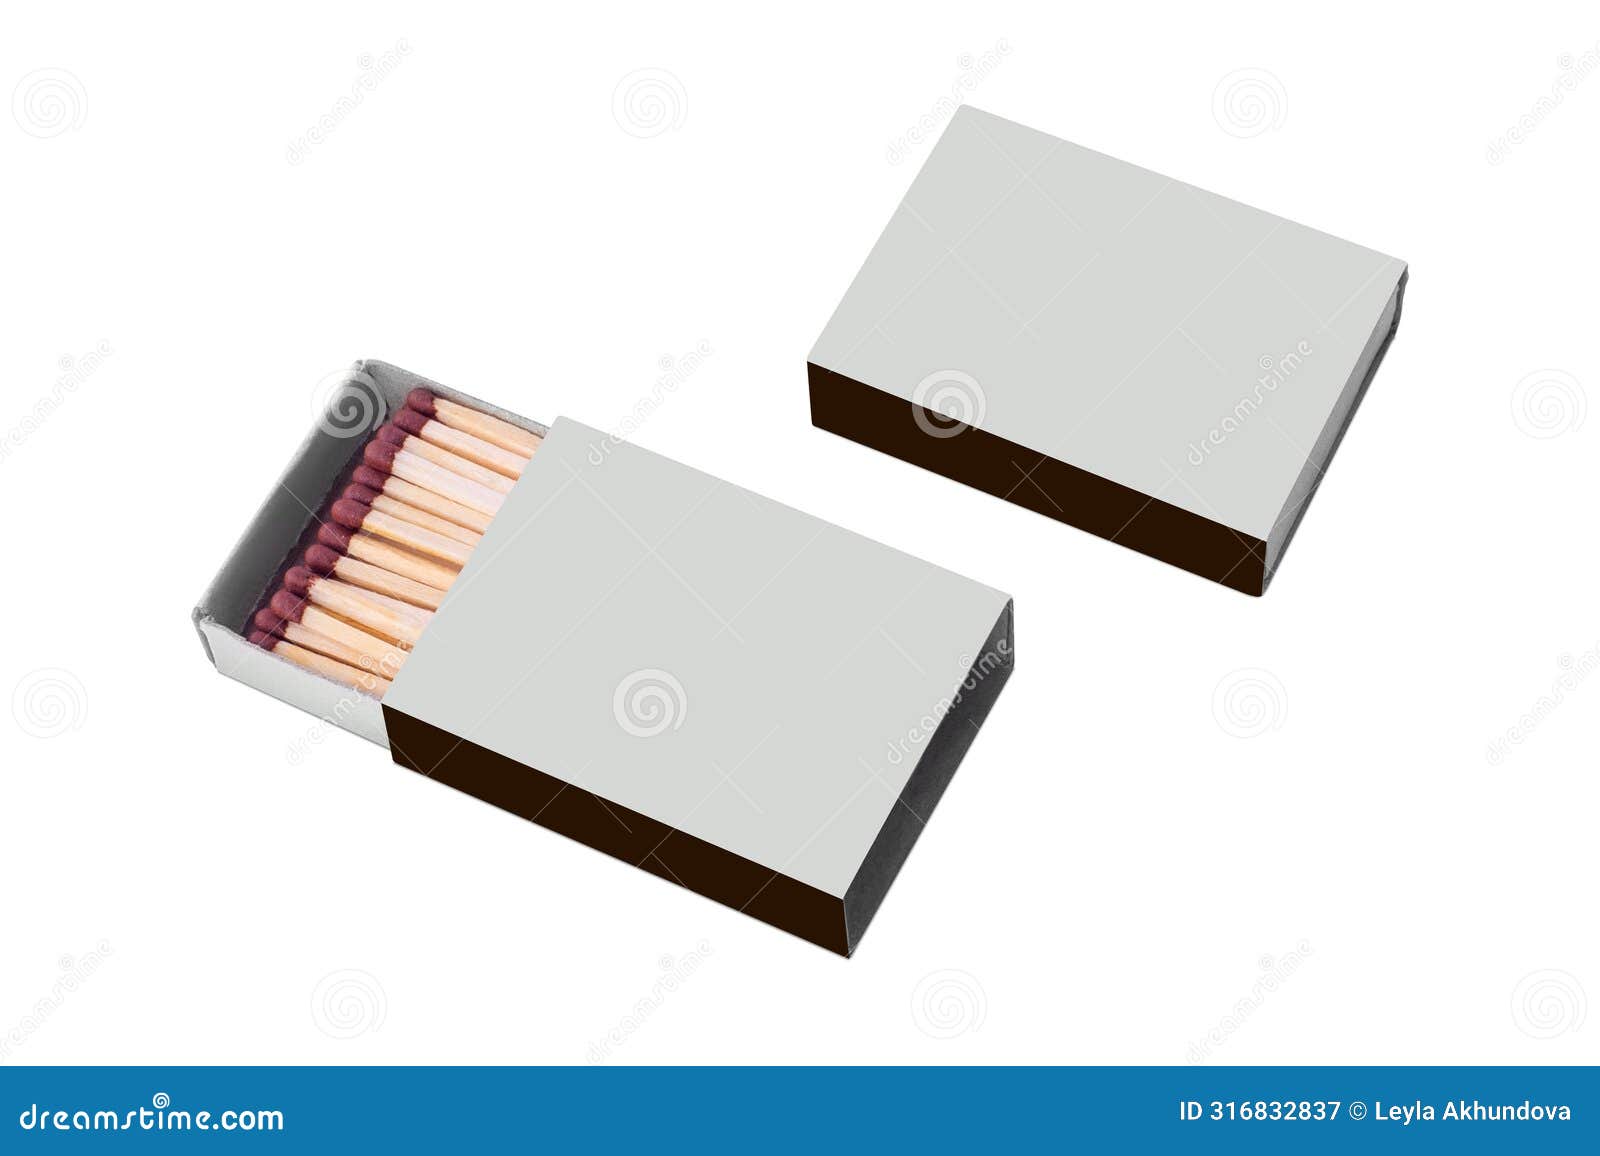 blank empty open and closed matchbook mockup template  on white background.